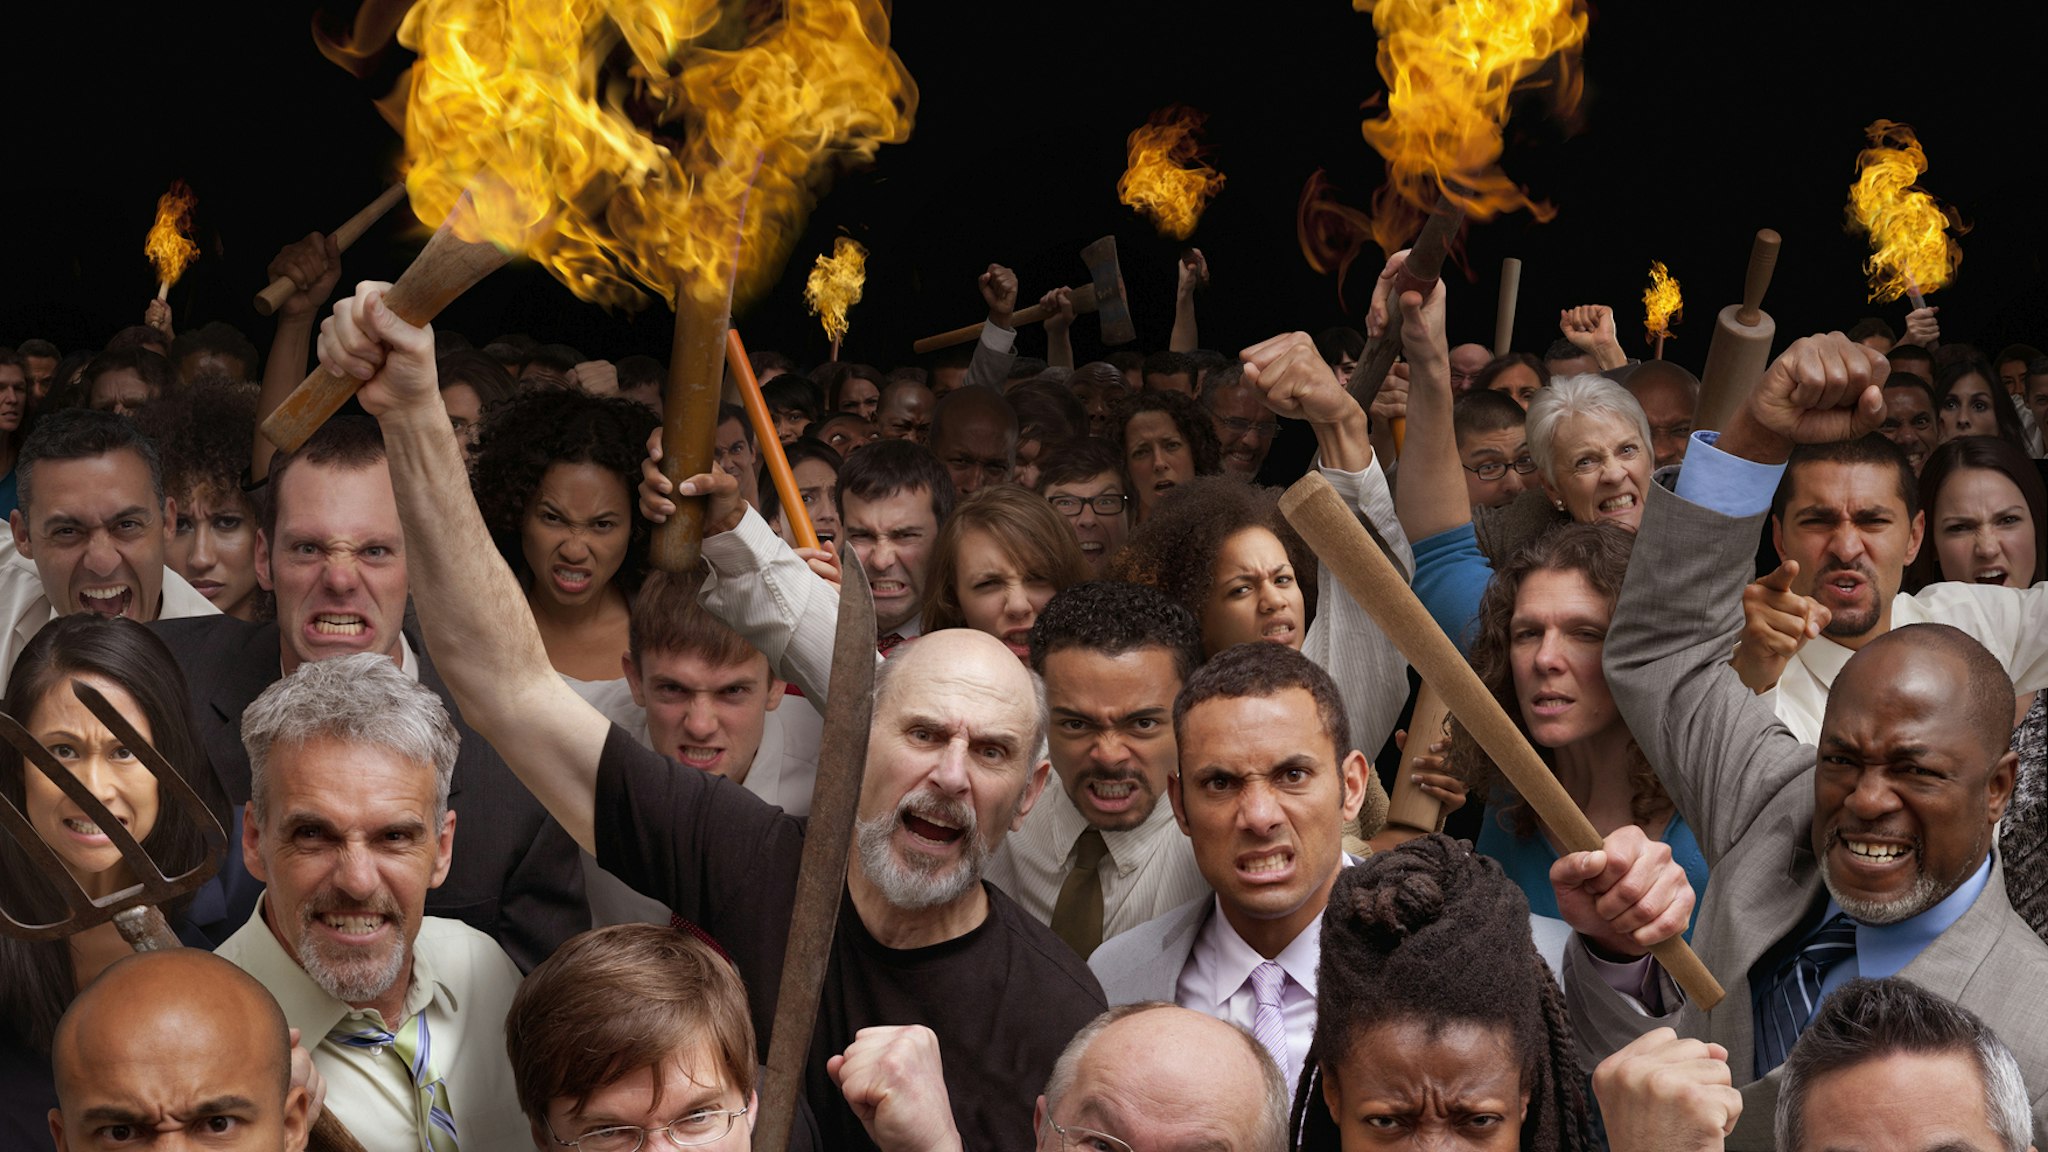 Angry crowd carrying torches - stock photo